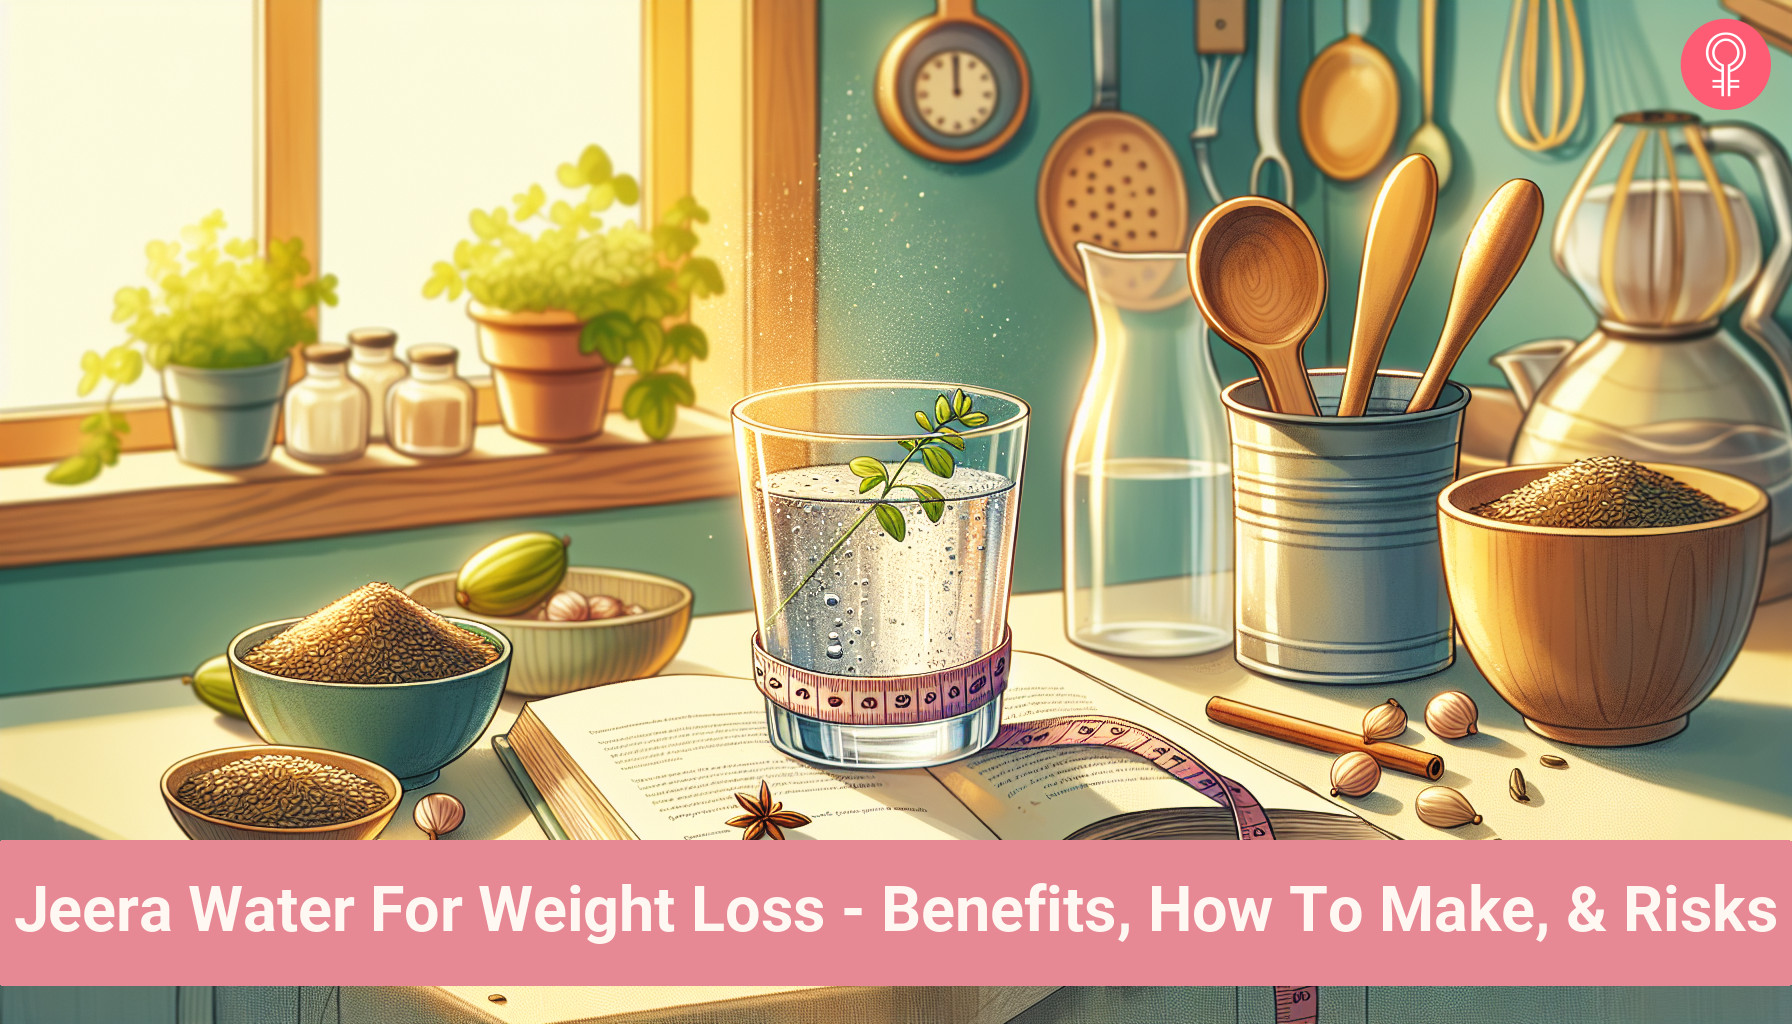 jeera water for weight loss_illustration